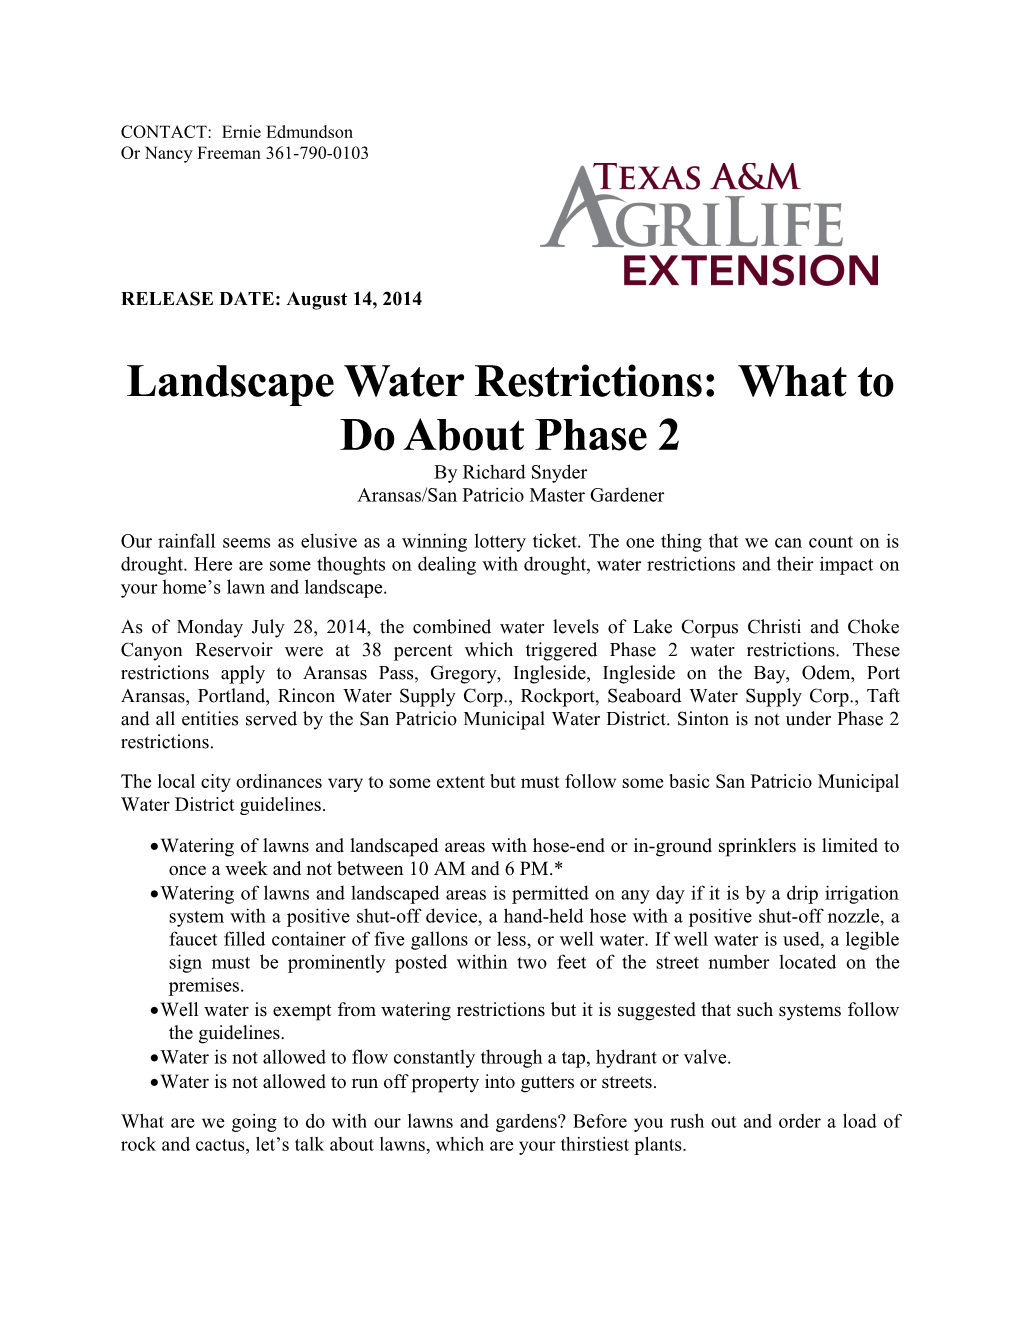 Landscape Water Restrictions: What to Do About Phase 2